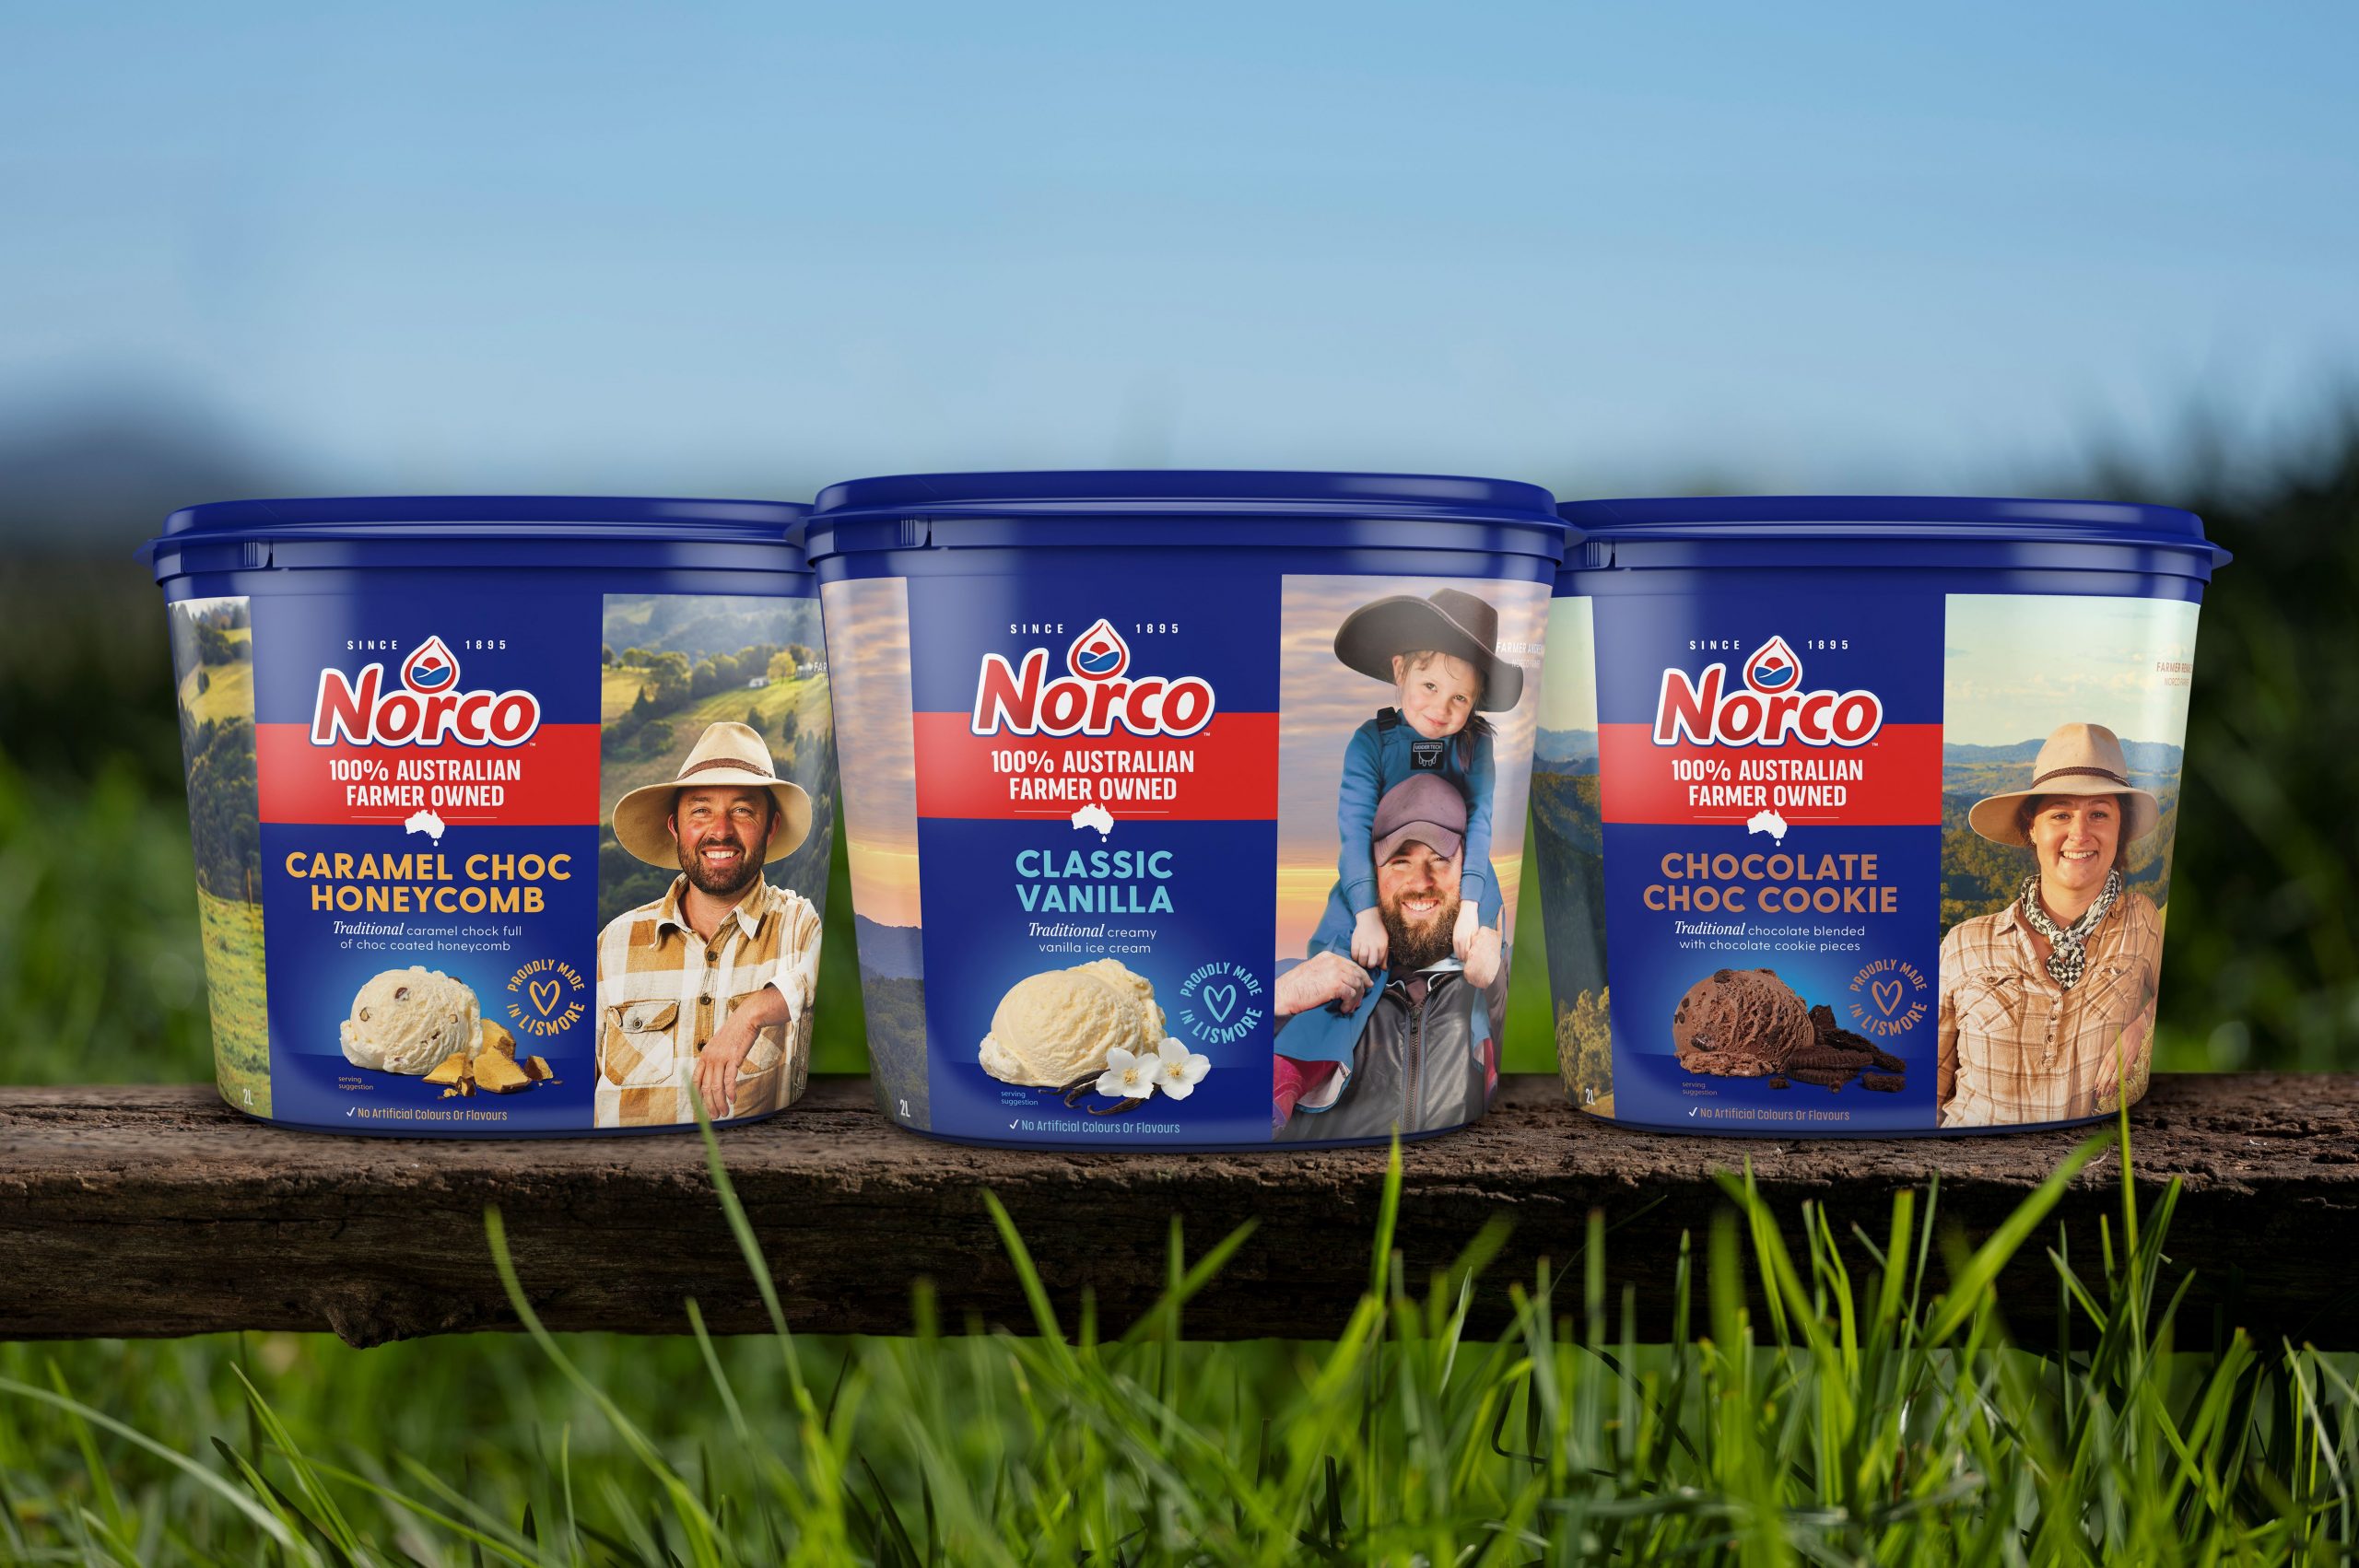 Norco teams up with Magdalena Roze to produce a new range of premium ice cream